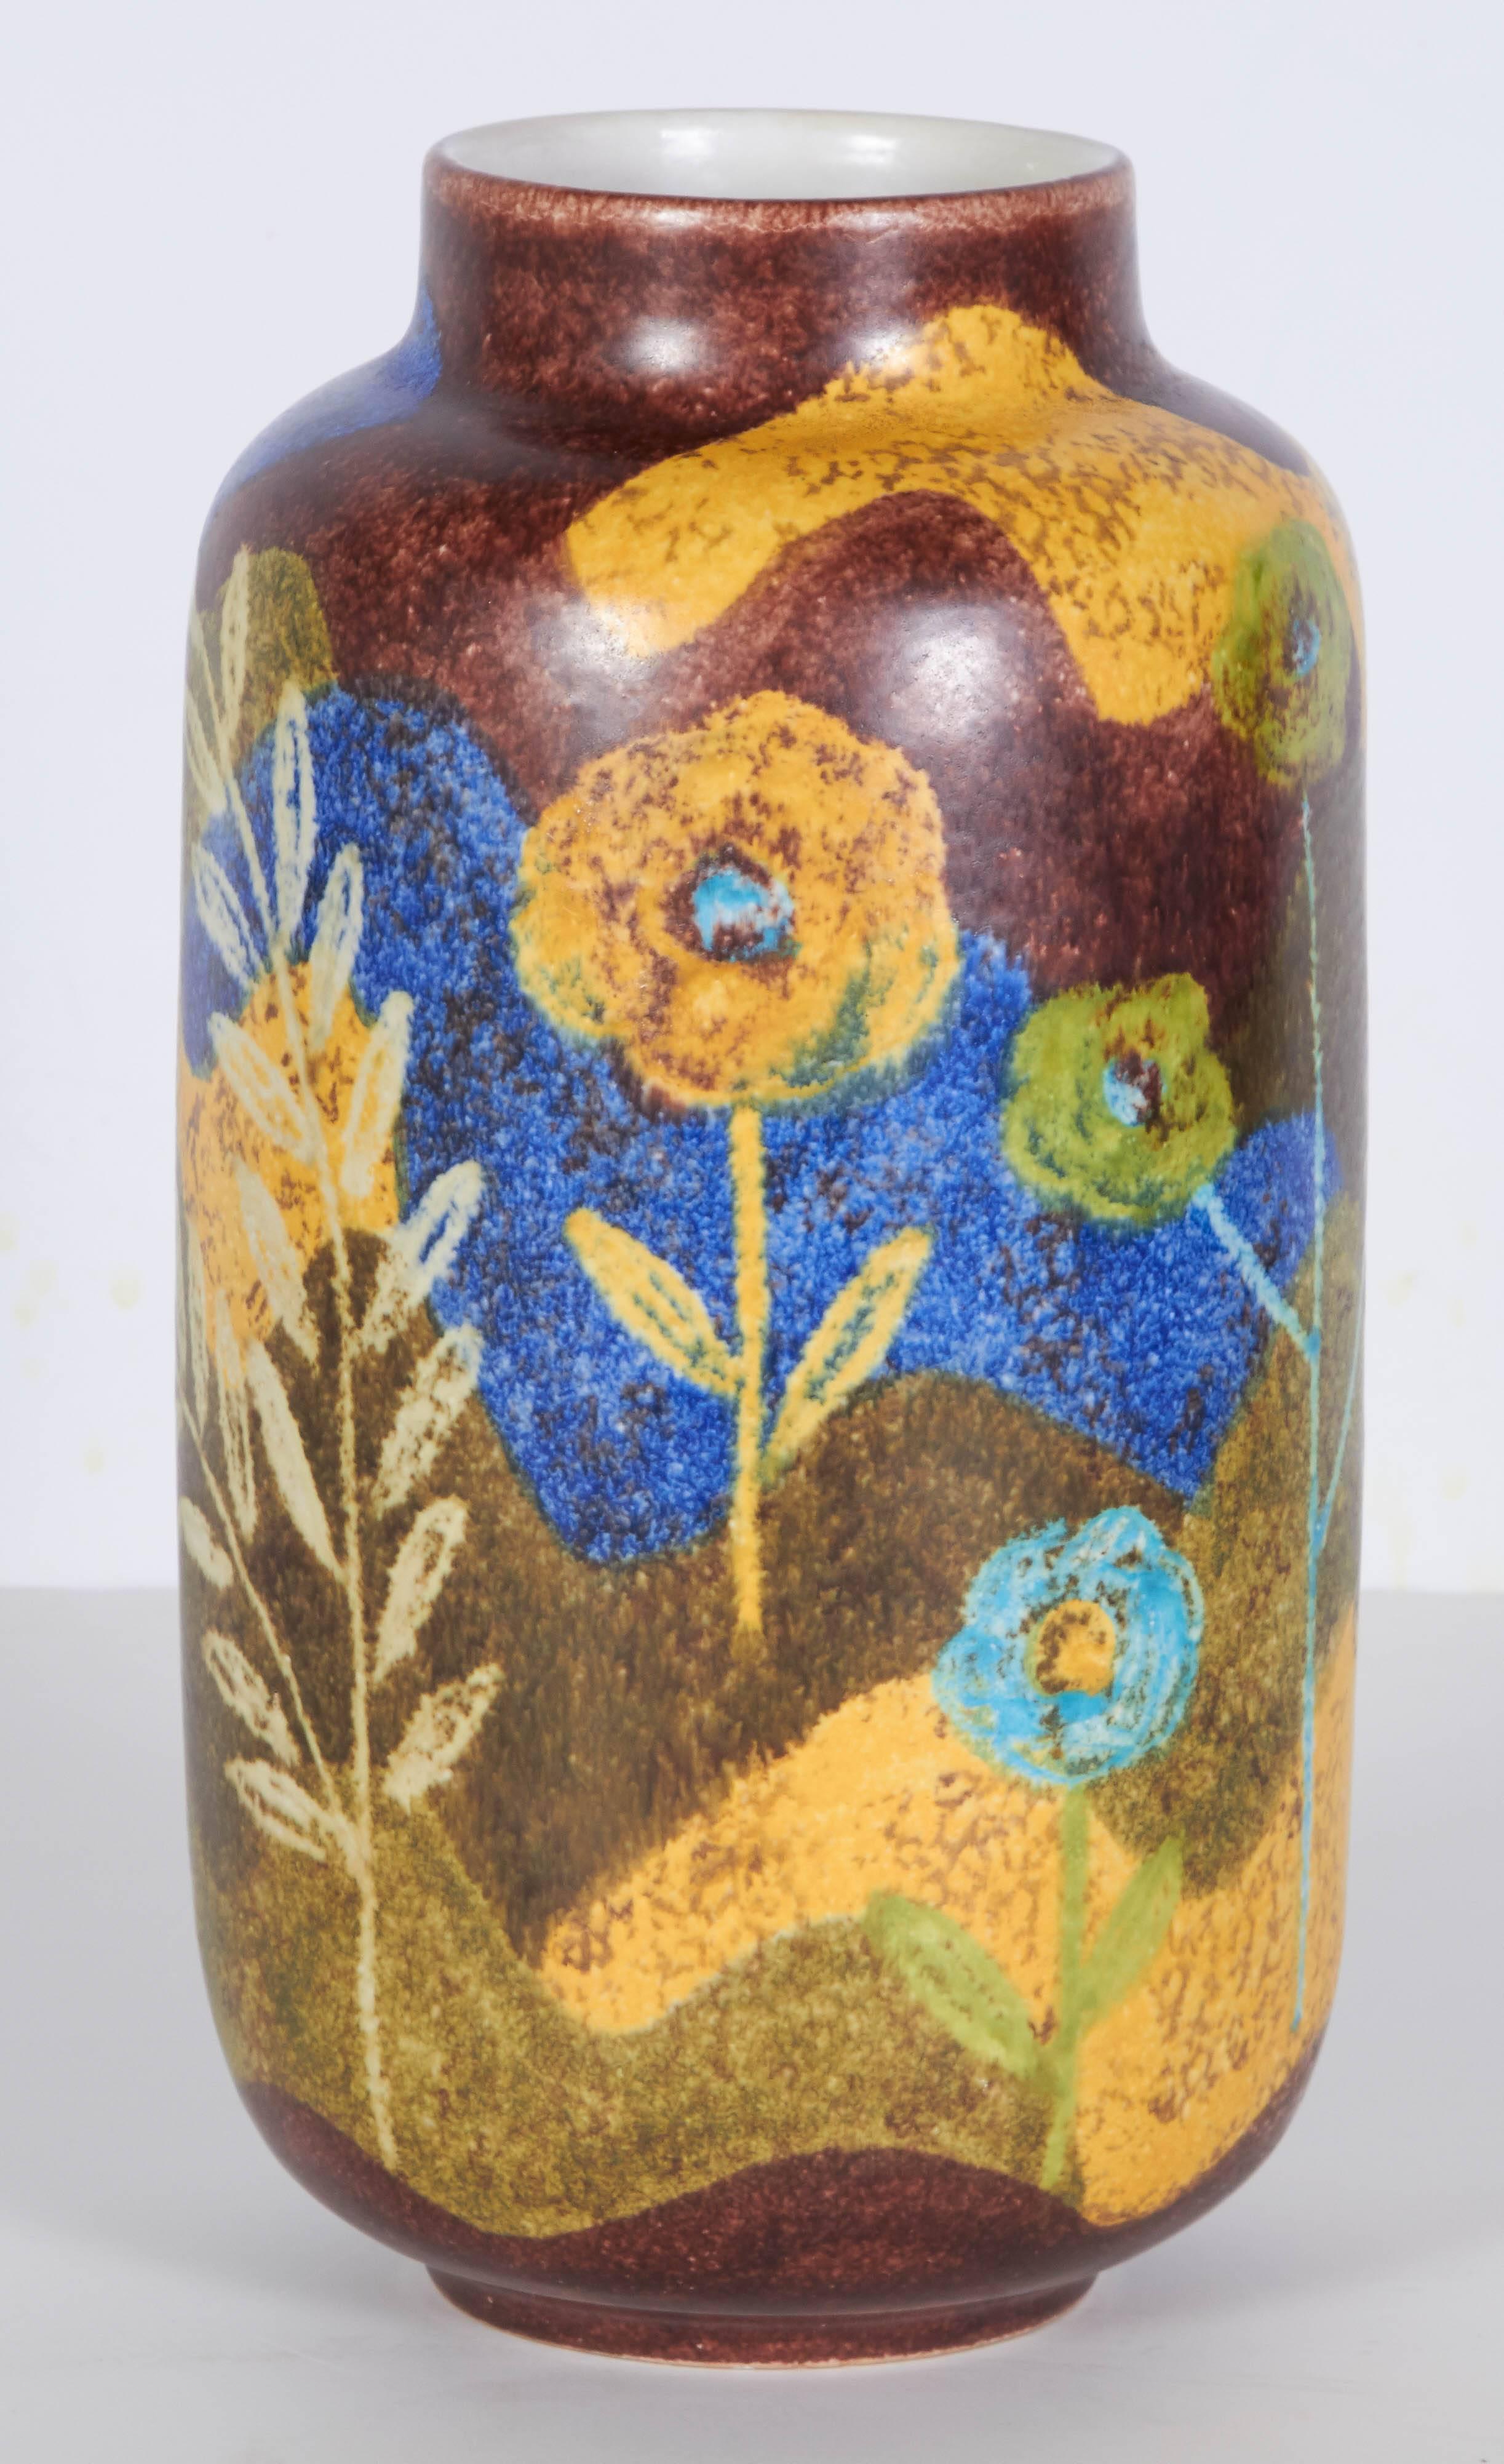 Lovely glazed ceramic vase imported by Raymor. Please contact for location.